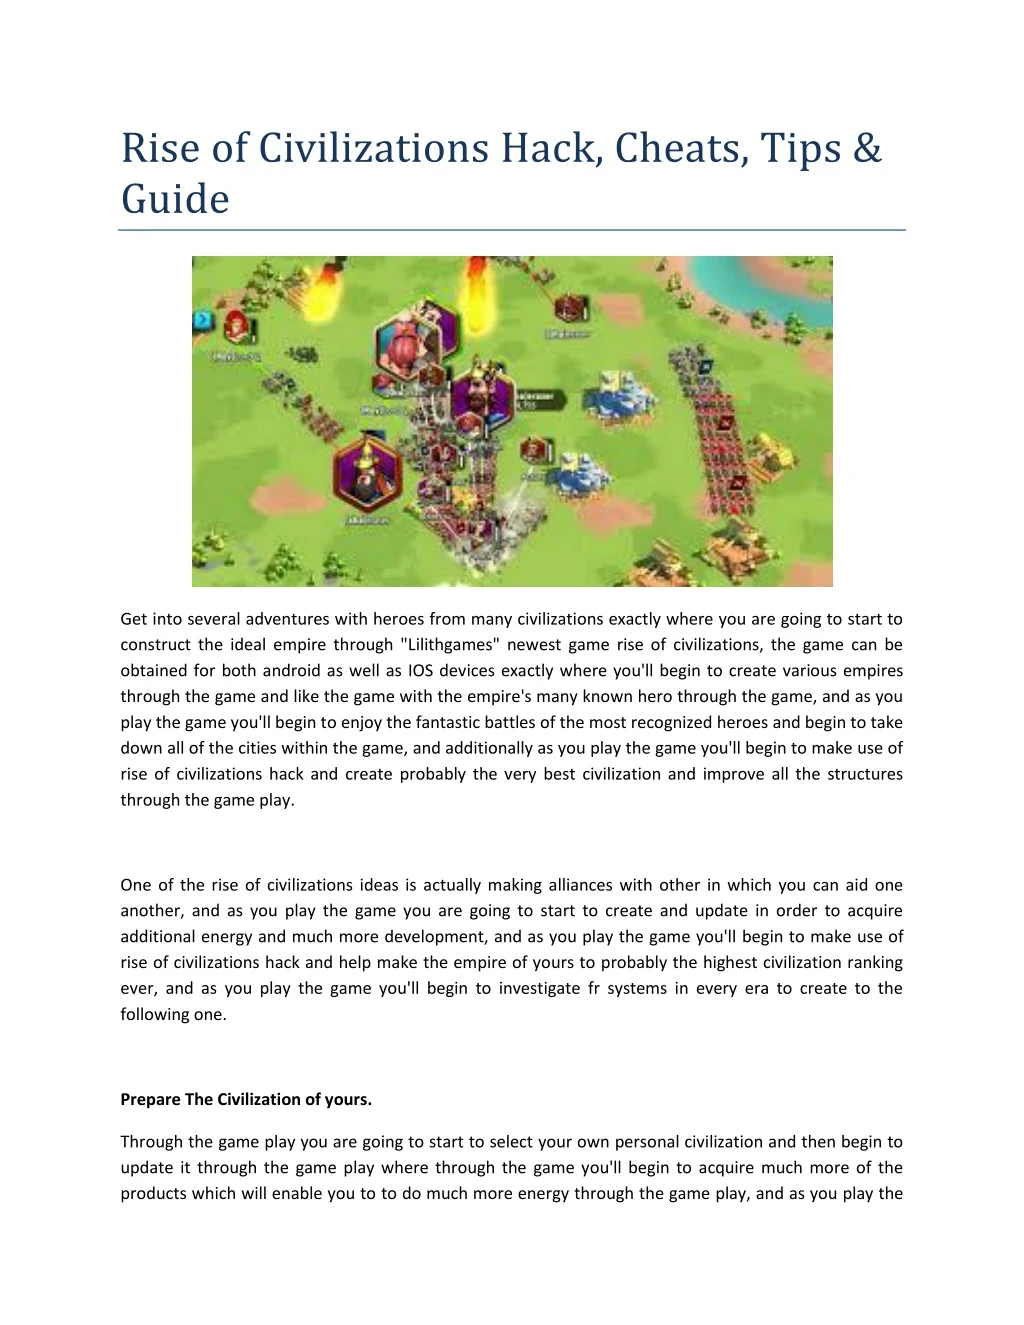 rise of civilizations hack cheats tips guide